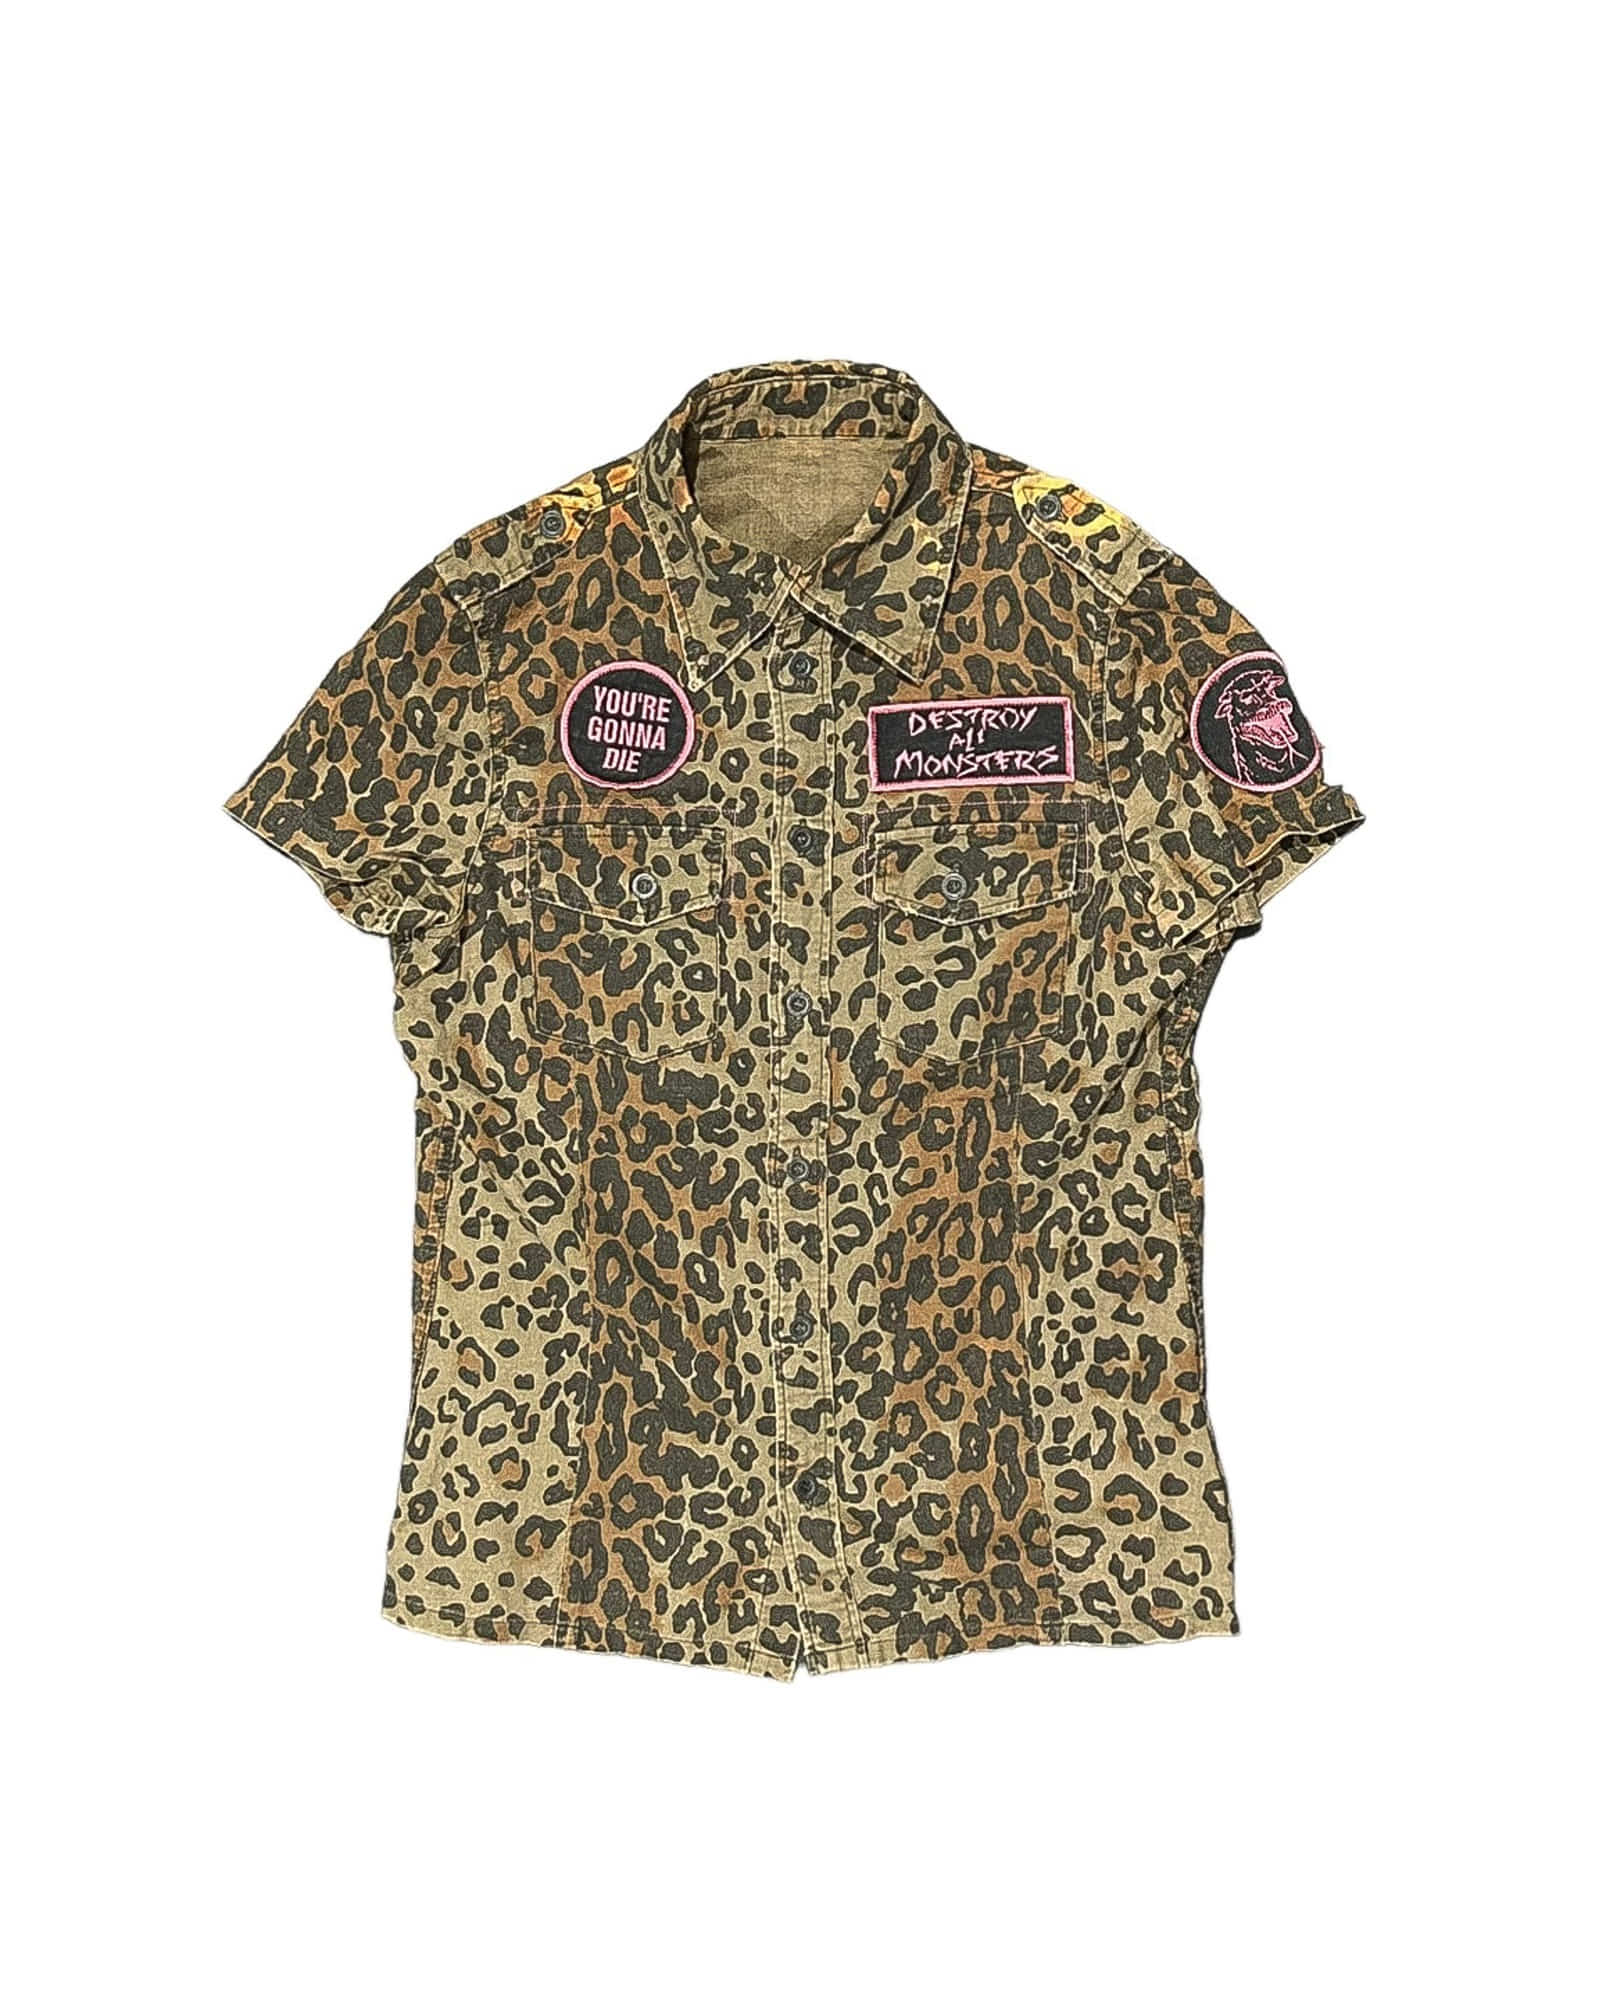 Hysteric Glamour Camouflage Half Shirt